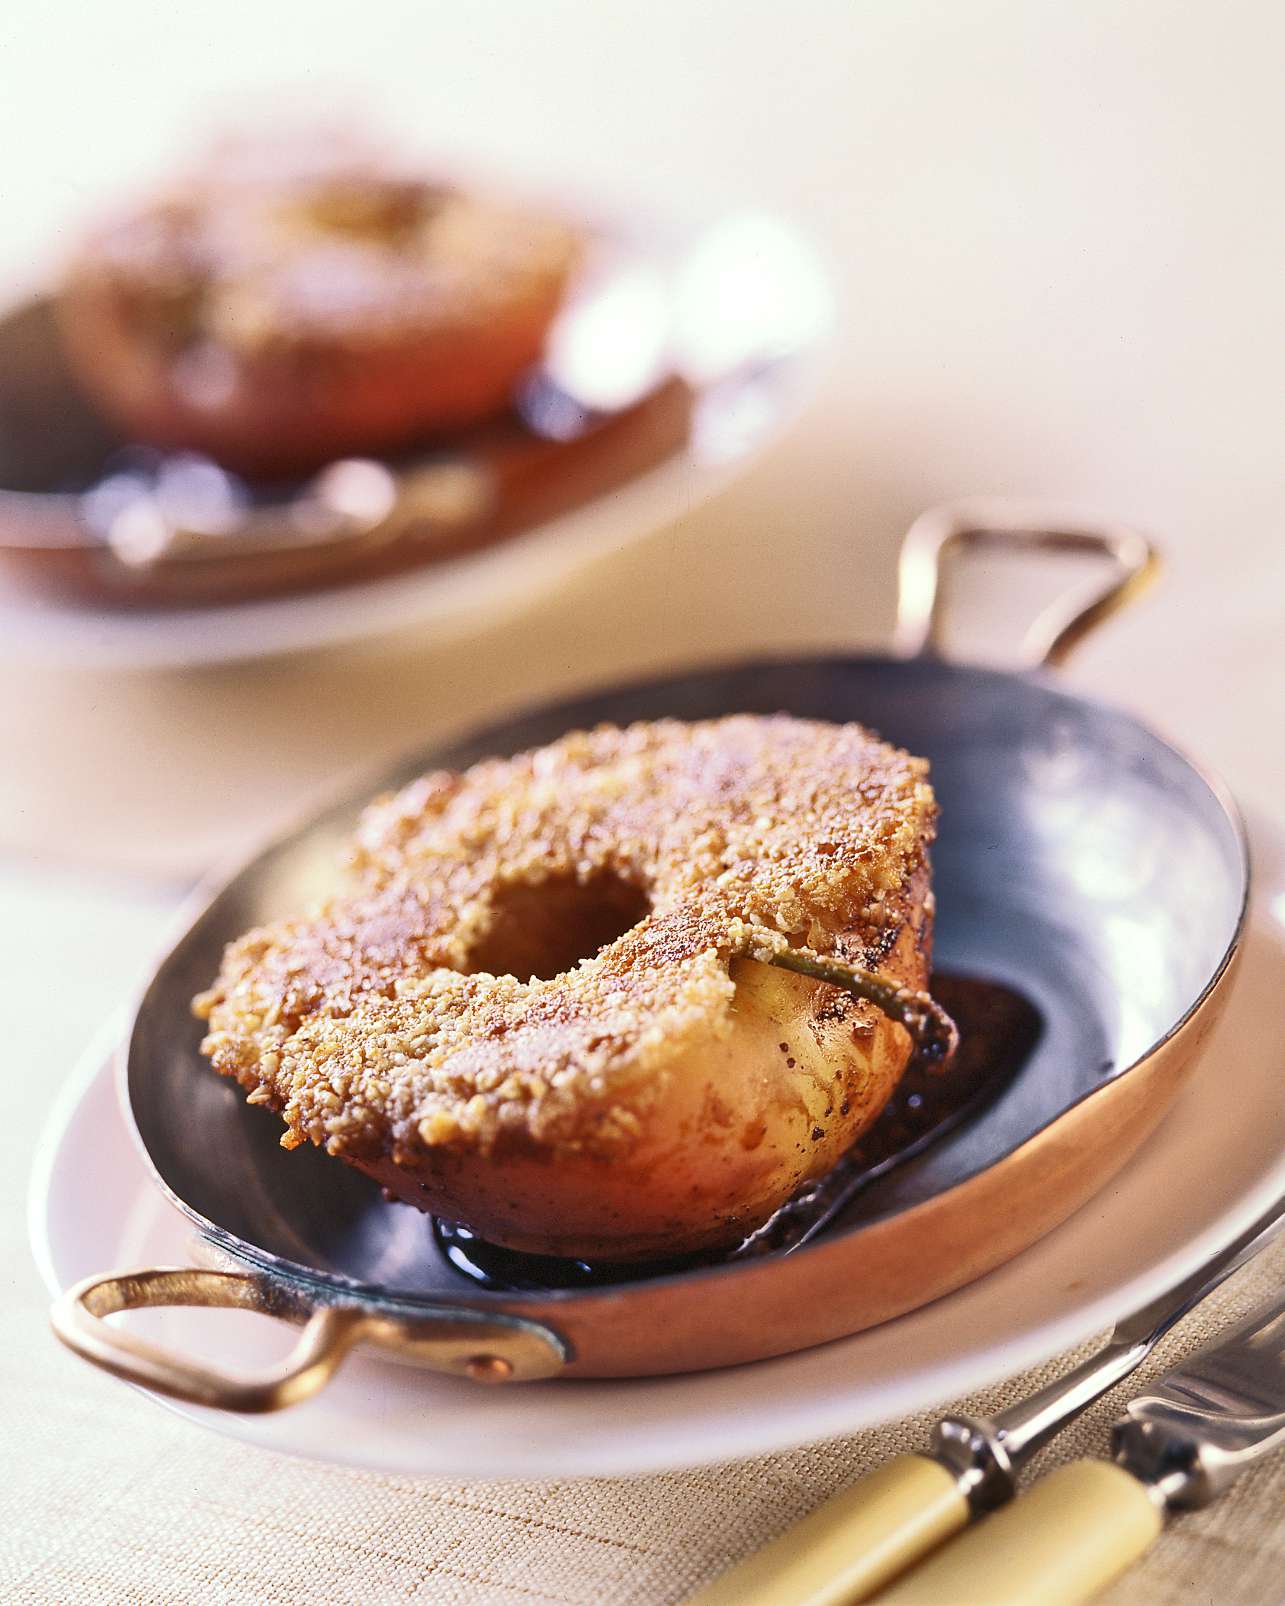 Seared Apples with cinnamon